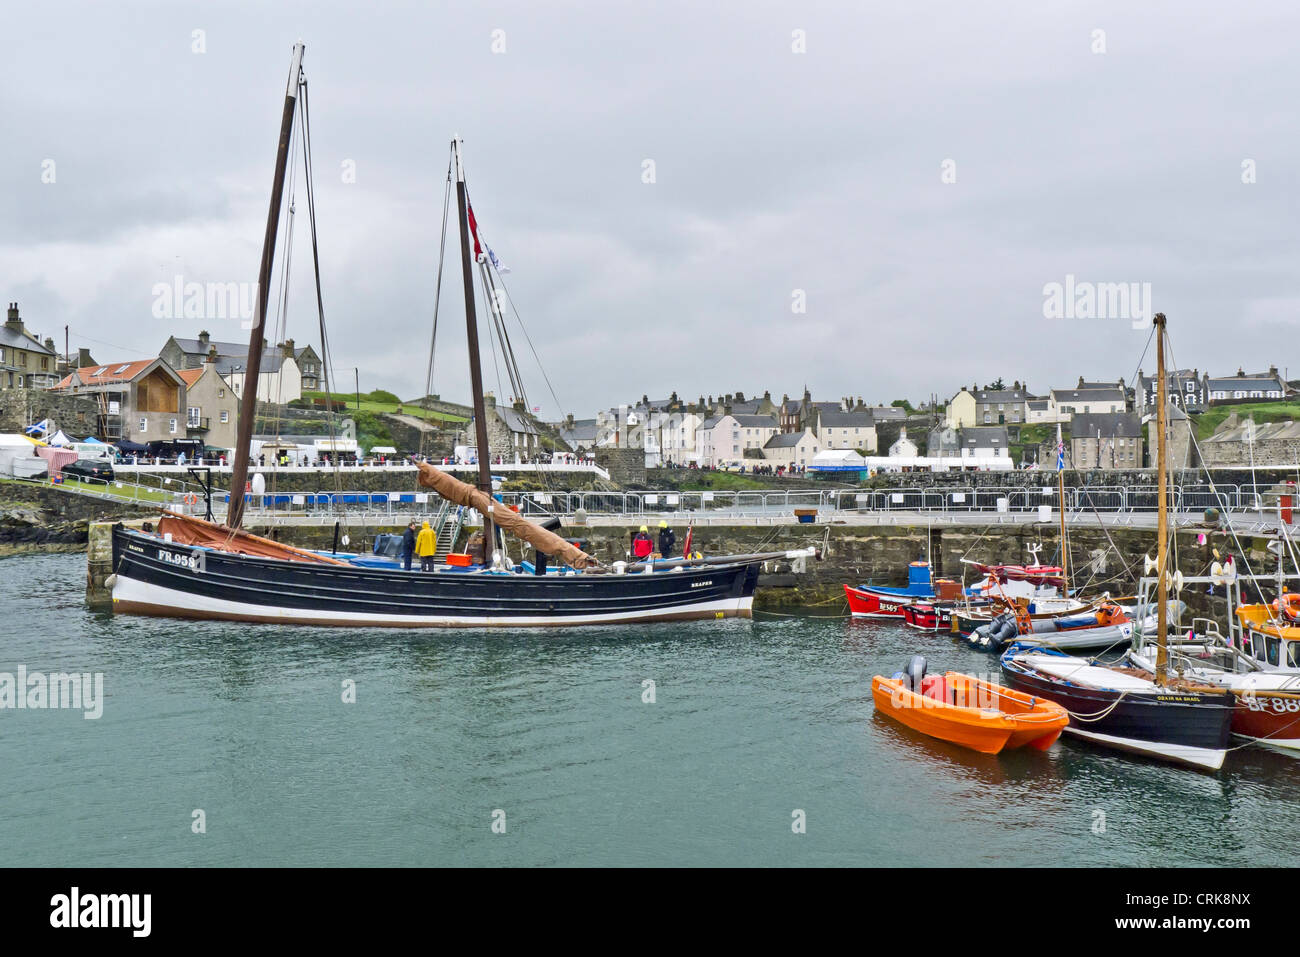 A general view of Portsoy Harbour during the the 19th Scottish Traditional Boat Festival held this year in wet weather Stock Photo